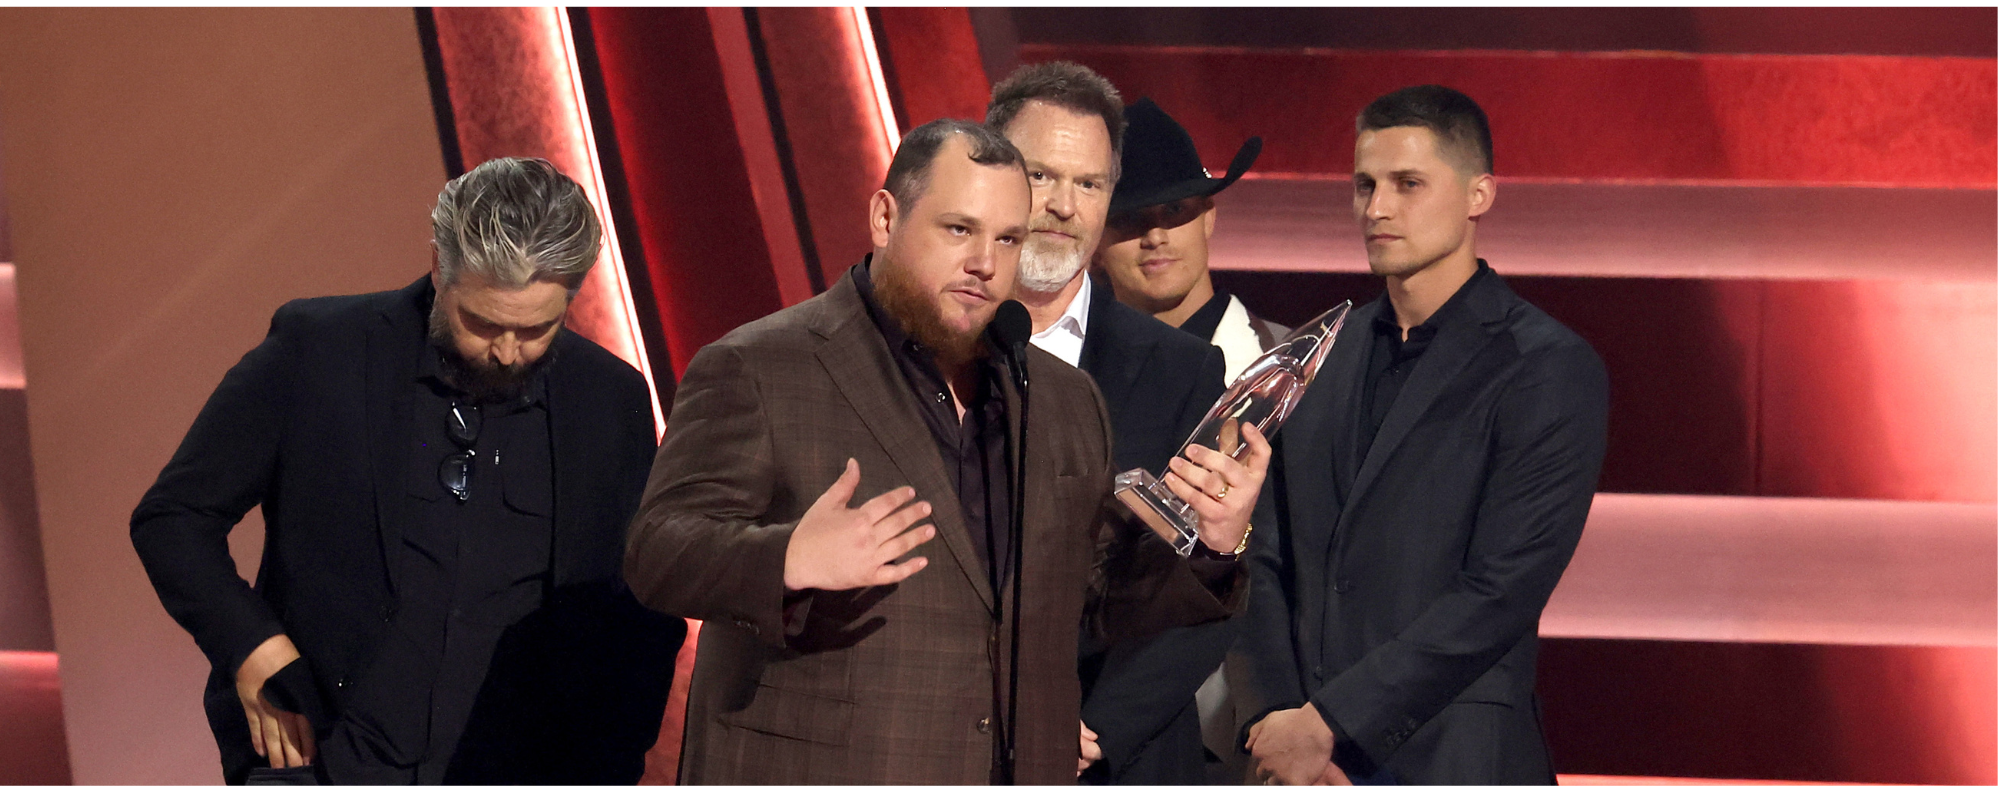 Luke Combs Wins Single of the Year for “Fast Car” at 2023 CMA Awards